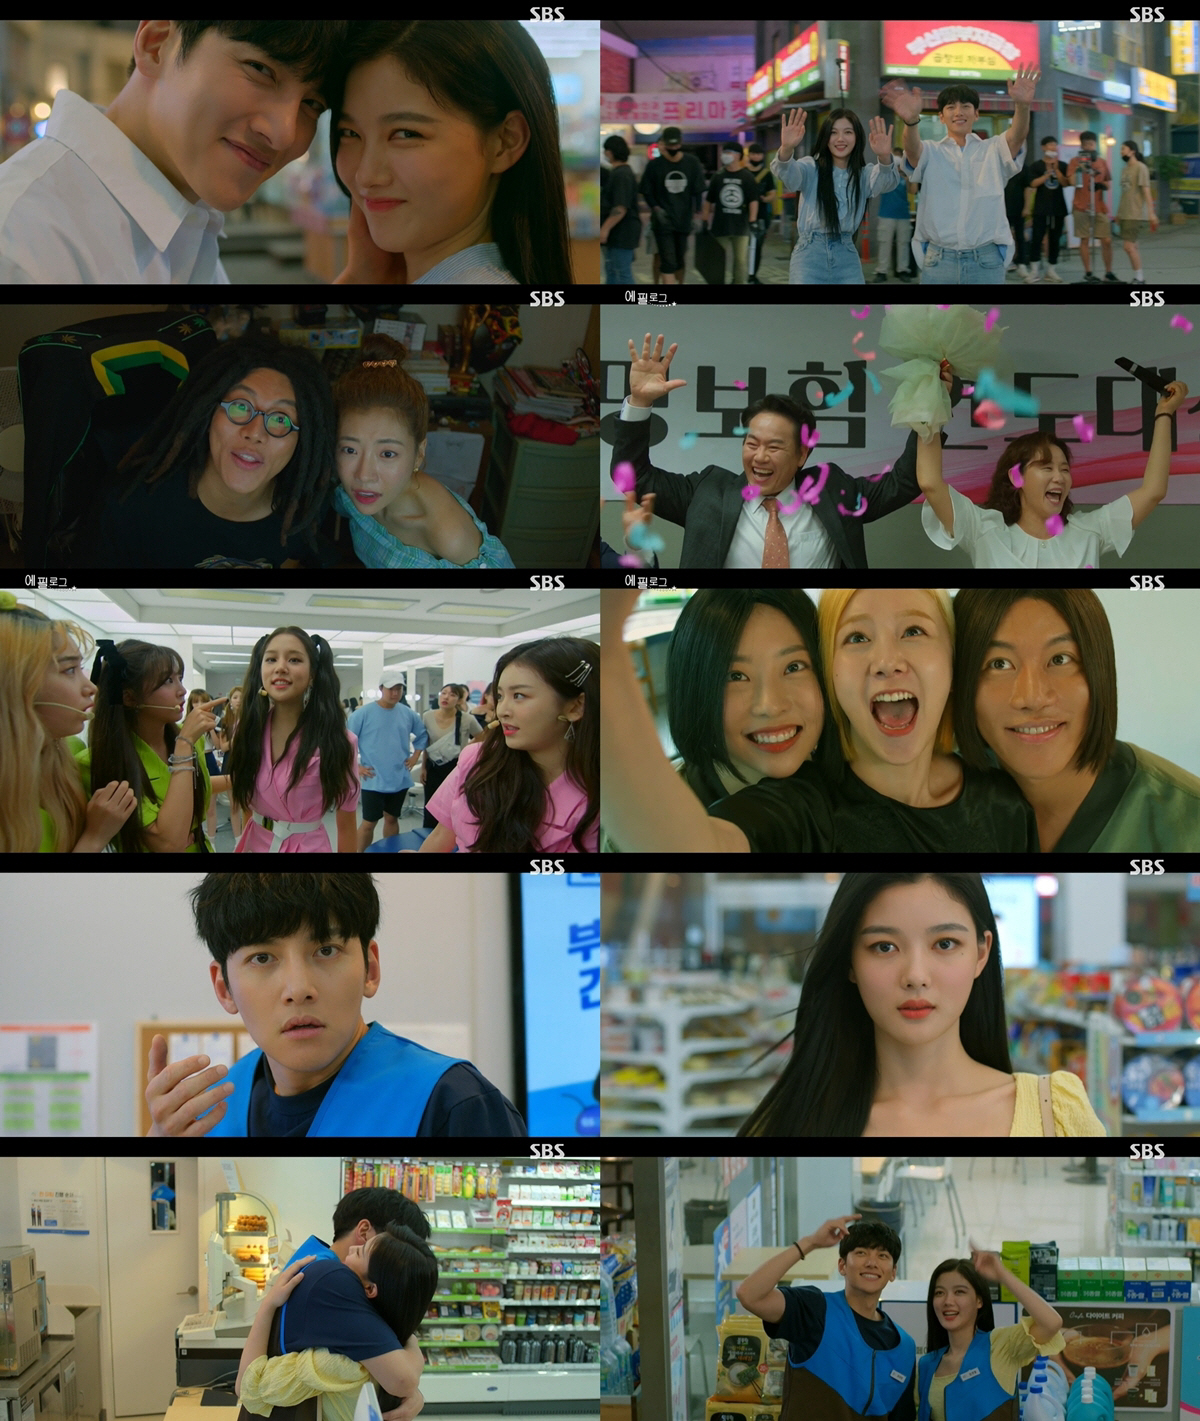 Actor Ji Chang-wook and Kim Yoo-jungs 24-hour Convenience store romance came to an end.On the 8th, SBS gilt drama Convenience store morning star was concluded.On the day of the show, Choi Dae-heon (Ji Chang-wook) and Kim Yoo-jung all returned to the Convenience store and showed Happy Endings looking for dreams and love.Choi Dae-heon promised to wait until I come back to the star who went down to the country flower farm.And realizing that he was a Convenience store, he quit his advisory committee at the headquarters and returned to Jongno Shinseong branch manager.Choi Dae-heon put on the Alba Saving paper and waited for the star. He also informed his family why the star left.Choi Dae-heon said, My mother always tells me not to live like this, but I will live like my mother Father.I believe this is happiness and more value. Later, the star returned to the Convenience store of Choi Dae-heon waiting for him.The announcement of the Alba Saving read the letter Supporting Star.The two people who seemed to have returned to the time when they came to the first Alba interview with the Convenience store were reproduced.Choi Dae-heon, who laughs happily while confirming each others hearts, and Jeong Sae-sungs figure is drawn as a new webtoon by Han Dal-sik (Eum Mun-seok), and decorated the last chapter of the 24-hour Convenience store romance.Ji Chang-wook and Kim Yoo-jung, who played Hot Summer Days at the center of Convenience store morning star, confirmed the true value of the actor who once again believes.Ji Chang-wook delightfully led the play with natural life acting, comic acting that was broken.Viewers were forced to fall in love with Ji Chang-wooks Hot Summer Days, which made use of the charm of Choi Dae-heon, a mild-tasting manager.Kim Yoo-jung is a character of a spicy alba star, and showed an act that crosses comic, romance and action.Kim Yoo-jung is not a star that can not be imagined by the Convenience store star with the act of the act is a reaction.The feast of character and fantasy chemistry filled the drama.Reggae Head Webtoon Writer Han Moon-siks calligraphy and bomb head Golden Bees calligraphy became a vital part of the drama as a new Stiller couple.In addition, Choi Dae-heons parents Kim Sun-young and Choi Yong-pils Lee Byung-joon completed the Convenience store morning star with a delicious acting drama.In addition, Solvin of Jung Eun-bum, the younger brother of Jung-Sun-Sung, has made a dream of becoming a copydol idol.The space Convenience store where Choi Dae-heon and Jeongsae star made a relationship was full of warmth.After losing Father and living with his brother, Jung Sae-byeol started the Convenience store Alba and was comforted by Choi Dae-heon and his family and got love.In the Convenience store with the star, Choi Dae-heon, who found the value of happiness in everyday life with his family, also painted the house theater with warmth.Convenience store morning star, which was painted with cool laughter in 2020 summer night, was a drama that made viewers happy with delightful drama development and comic scenes.Ji Chang-wook and Kim Yoo-jungs movie Pulp Fiction couple dance, various parody, omaju, and CG directing that doubles comics appeared every time and gave fun.Following the Fever Blood Priest, Lee Myung-woo made a comic restaurant drama Convenience store morning star with a light directing.Meanwhile, the audience rating of households in the Seoul metropolitan area was 10.7% (two copies, hereinafter Nielsen Korea count), 2049 ratings were 5.2%, and the highest audience rating per minute was up to 11.5%.